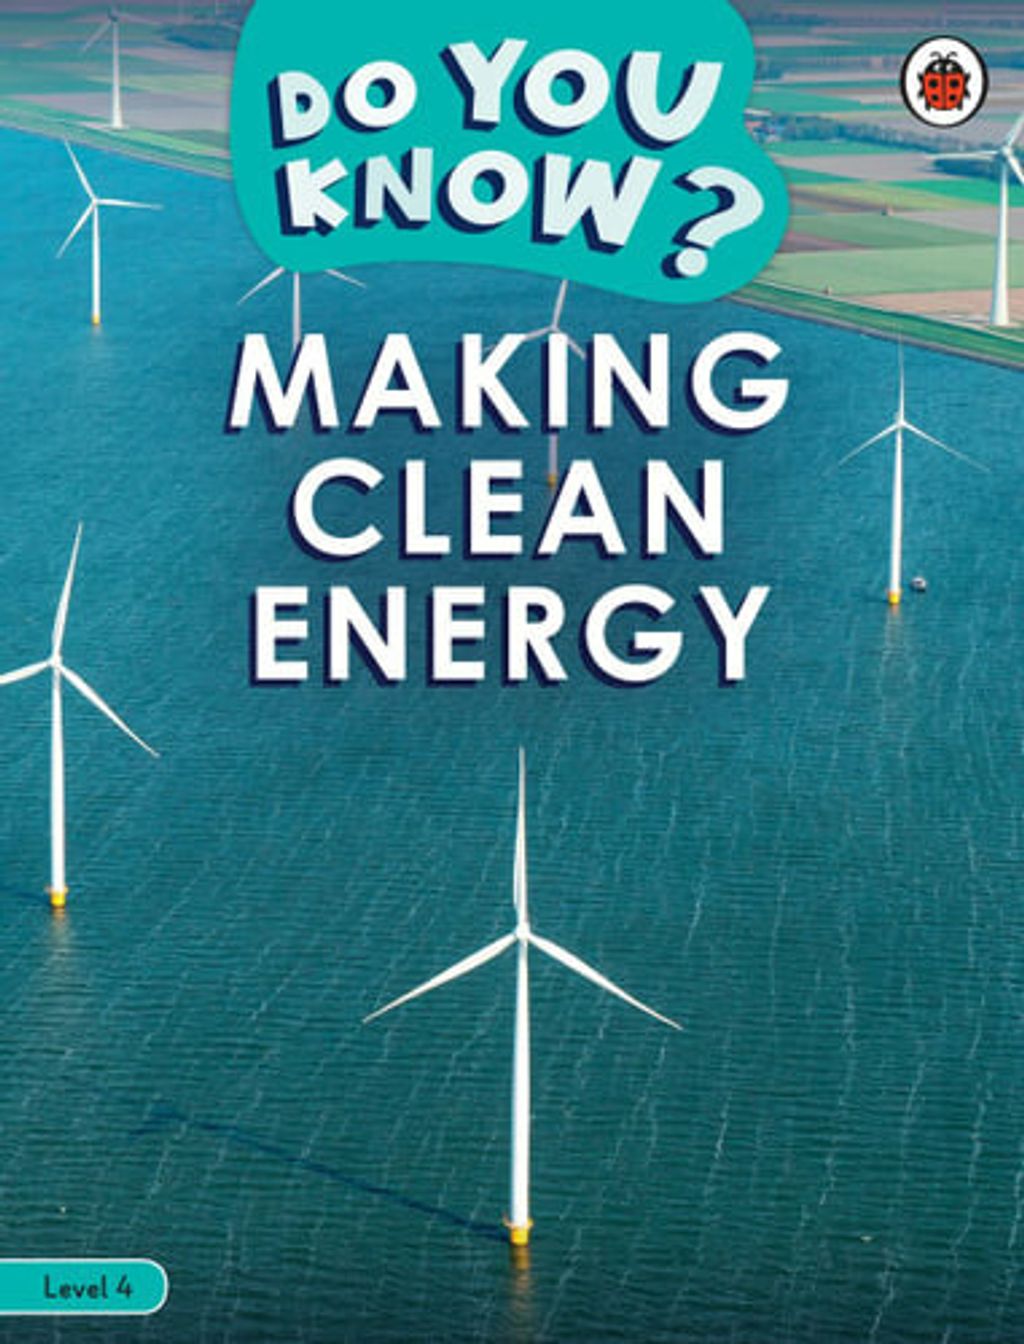 do-you-know-level-4-making-clean-energy.jpg